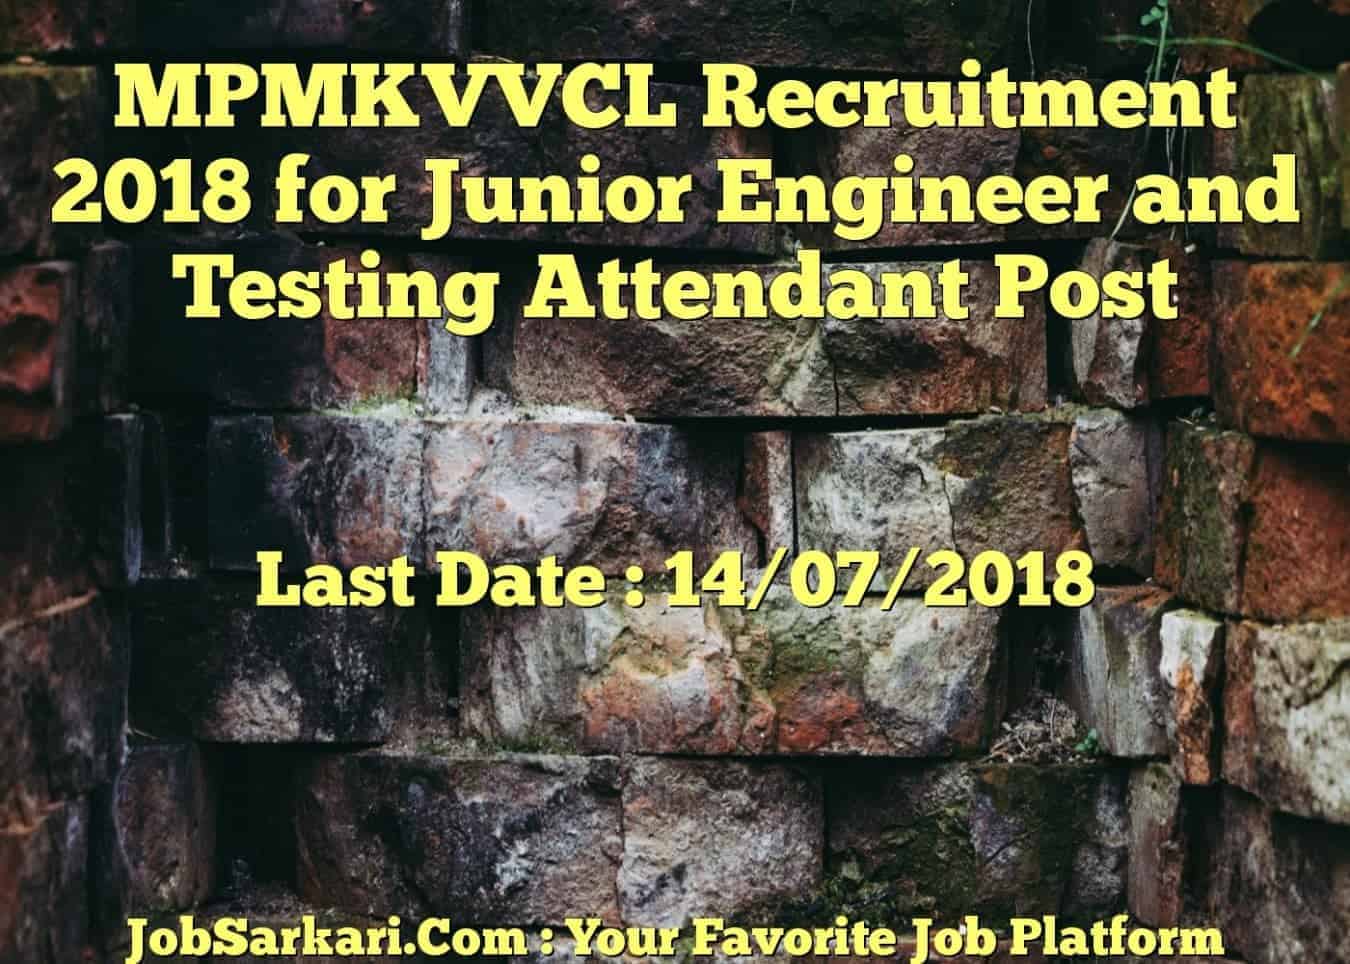 MPMKVVCL Recruitment 2018 for Junior Engineer and Testing Attendant Post